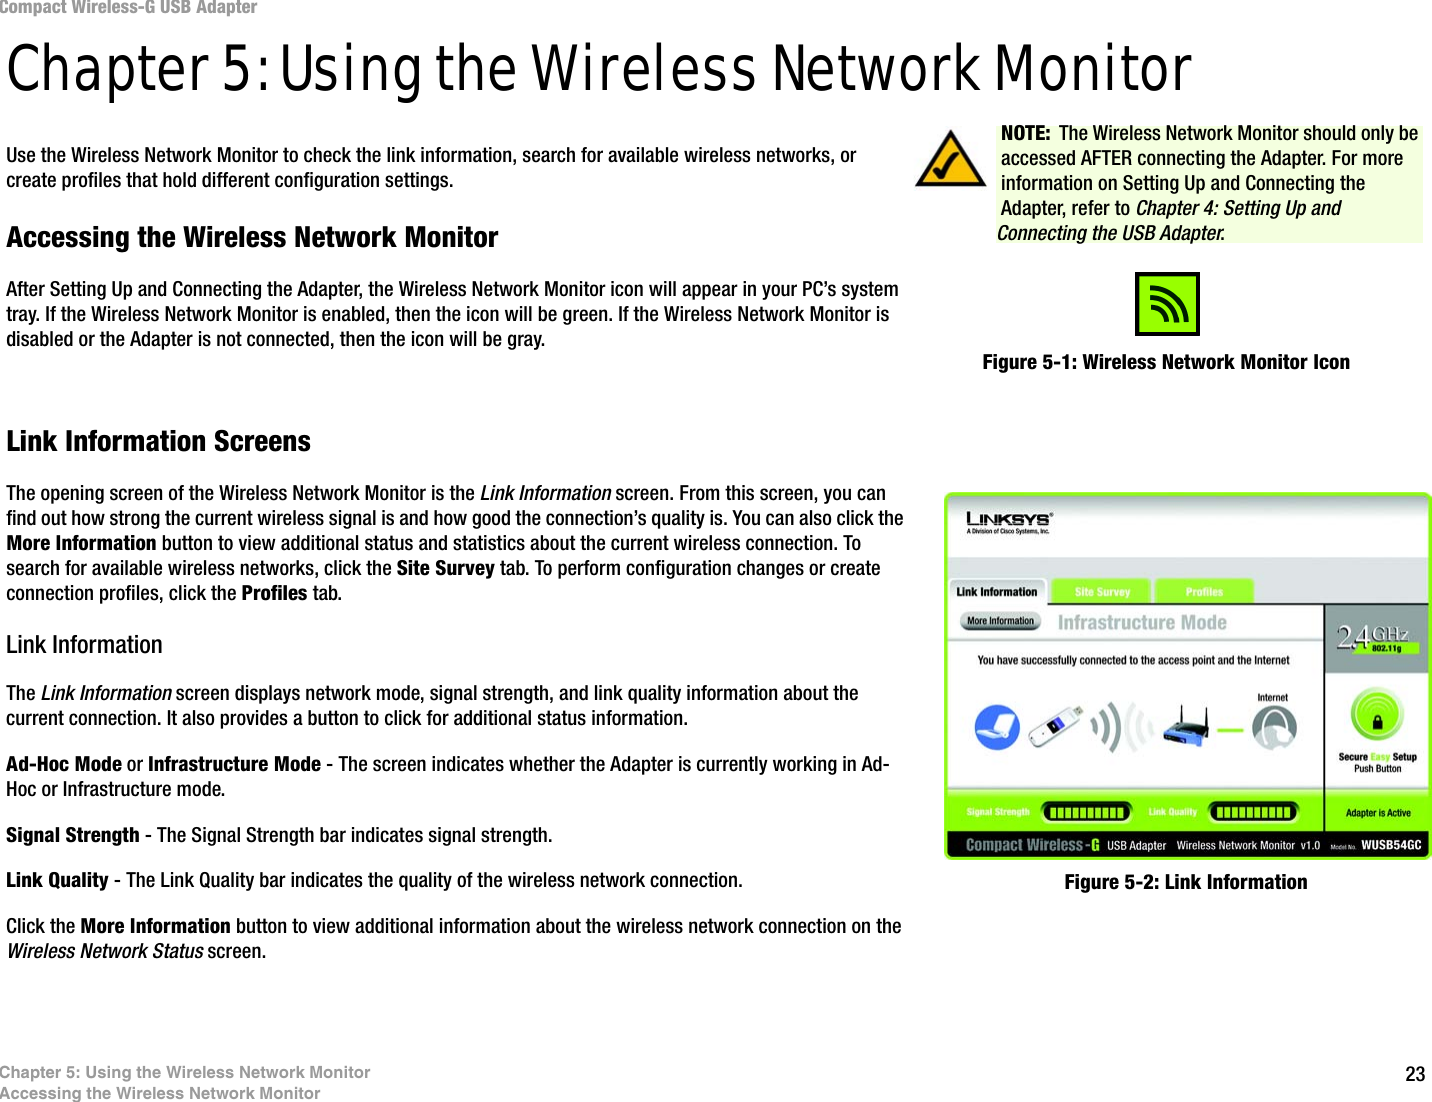 23Chapter 5: Using the Wireless Network MonitorAccessing the Wireless Network MonitorCompact Wireless-G USB AdapterChapter 5: Using the Wireless Network MonitorUse the Wireless Network Monitor to check the link information, search for available wireless networks, or create profiles that hold different configuration settings.Accessing the Wireless Network MonitorAfter Setting Up and Connecting the Adapter, the Wireless Network Monitor icon will appear in your PC’s system tray. If the Wireless Network Monitor is enabled, then the icon will be green. If the Wireless Network Monitor is disabled or the Adapter is not connected, then the icon will be gray.Link Information ScreensThe opening screen of the Wireless Network Monitor is the Link Information screen. From this screen, you can find out how strong the current wireless signal is and how good the connection’s quality is. You can also click the More Information button to view additional status and statistics about the current wireless connection. To search for available wireless networks, click the Site Survey tab. To perform configuration changes or create connection profiles, click the Profiles tab.Link InformationThe Link Information screen displays network mode, signal strength, and link quality information about the current connection. It also provides a button to click for additional status information.Ad-Hoc Mode or Infrastructure Mode - The screen indicates whether the Adapter is currently working in Ad-Hoc or Infrastructure mode.Signal Strength - The Signal Strength bar indicates signal strength. Link Quality - The Link Quality bar indicates the quality of the wireless network connection.Click the More Information button to view additional information about the wireless network connection on the Wireless Network Status screen.Figure 5-1: Wireless Network Monitor IconFigure 5-2: Link InformationNOTE: The Wireless Network Monitor should only be accessed AFTER connecting the Adapter. For more information on Setting Up and Connecting the Adapter, refer to Chapter 4: Setting Up and Connecting the USB Adapter.